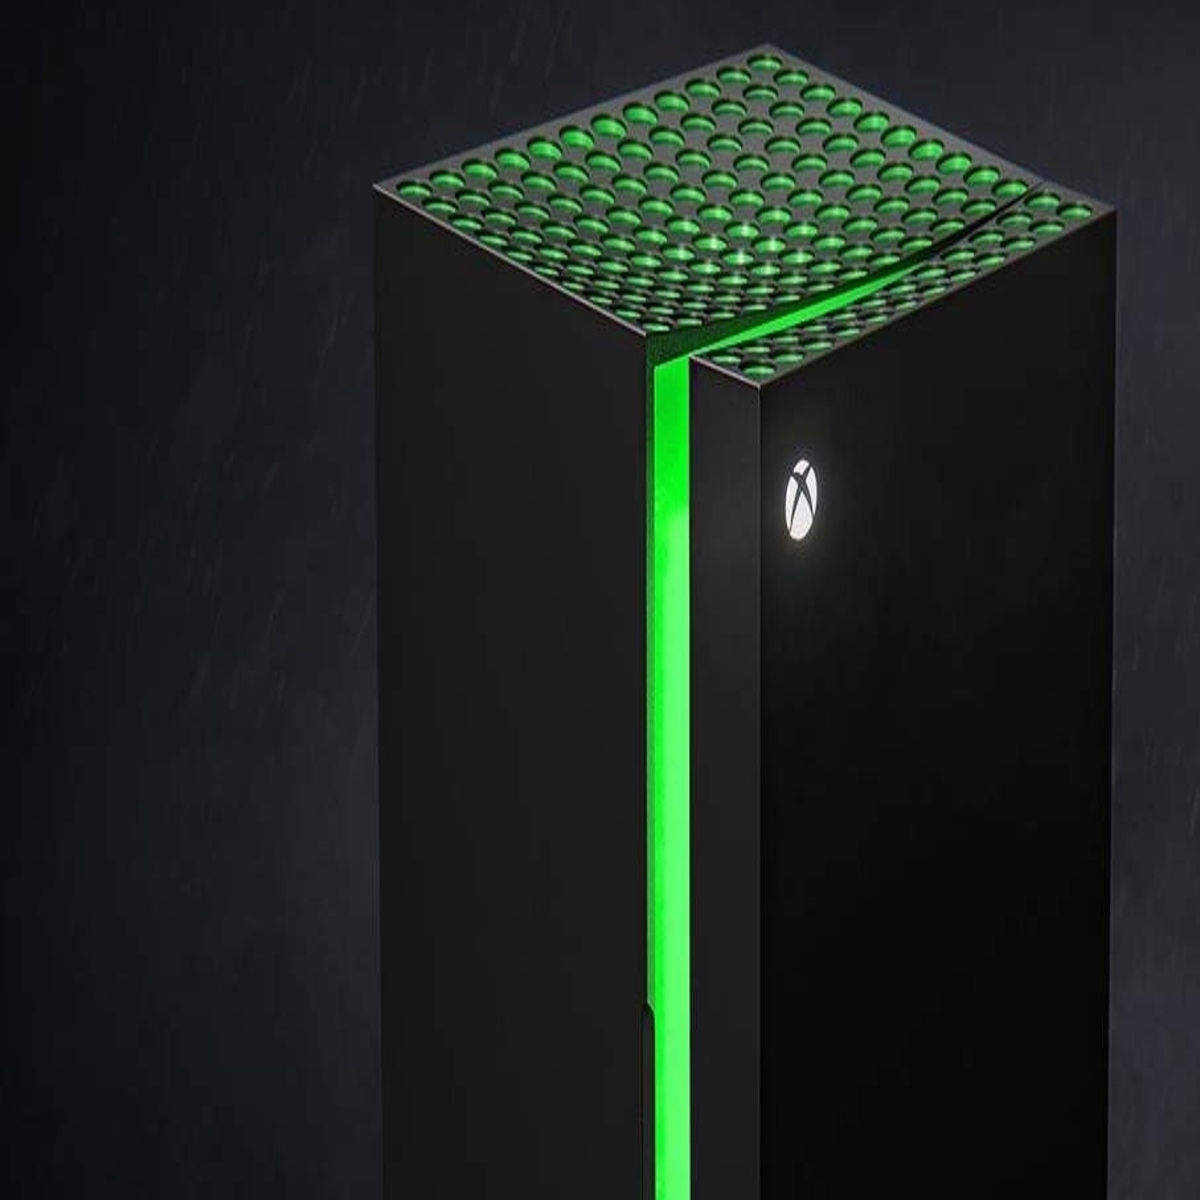 Keep Your Gaming Fuel Cold With New Xbox Series X Mini Fridge — GeekTyrant